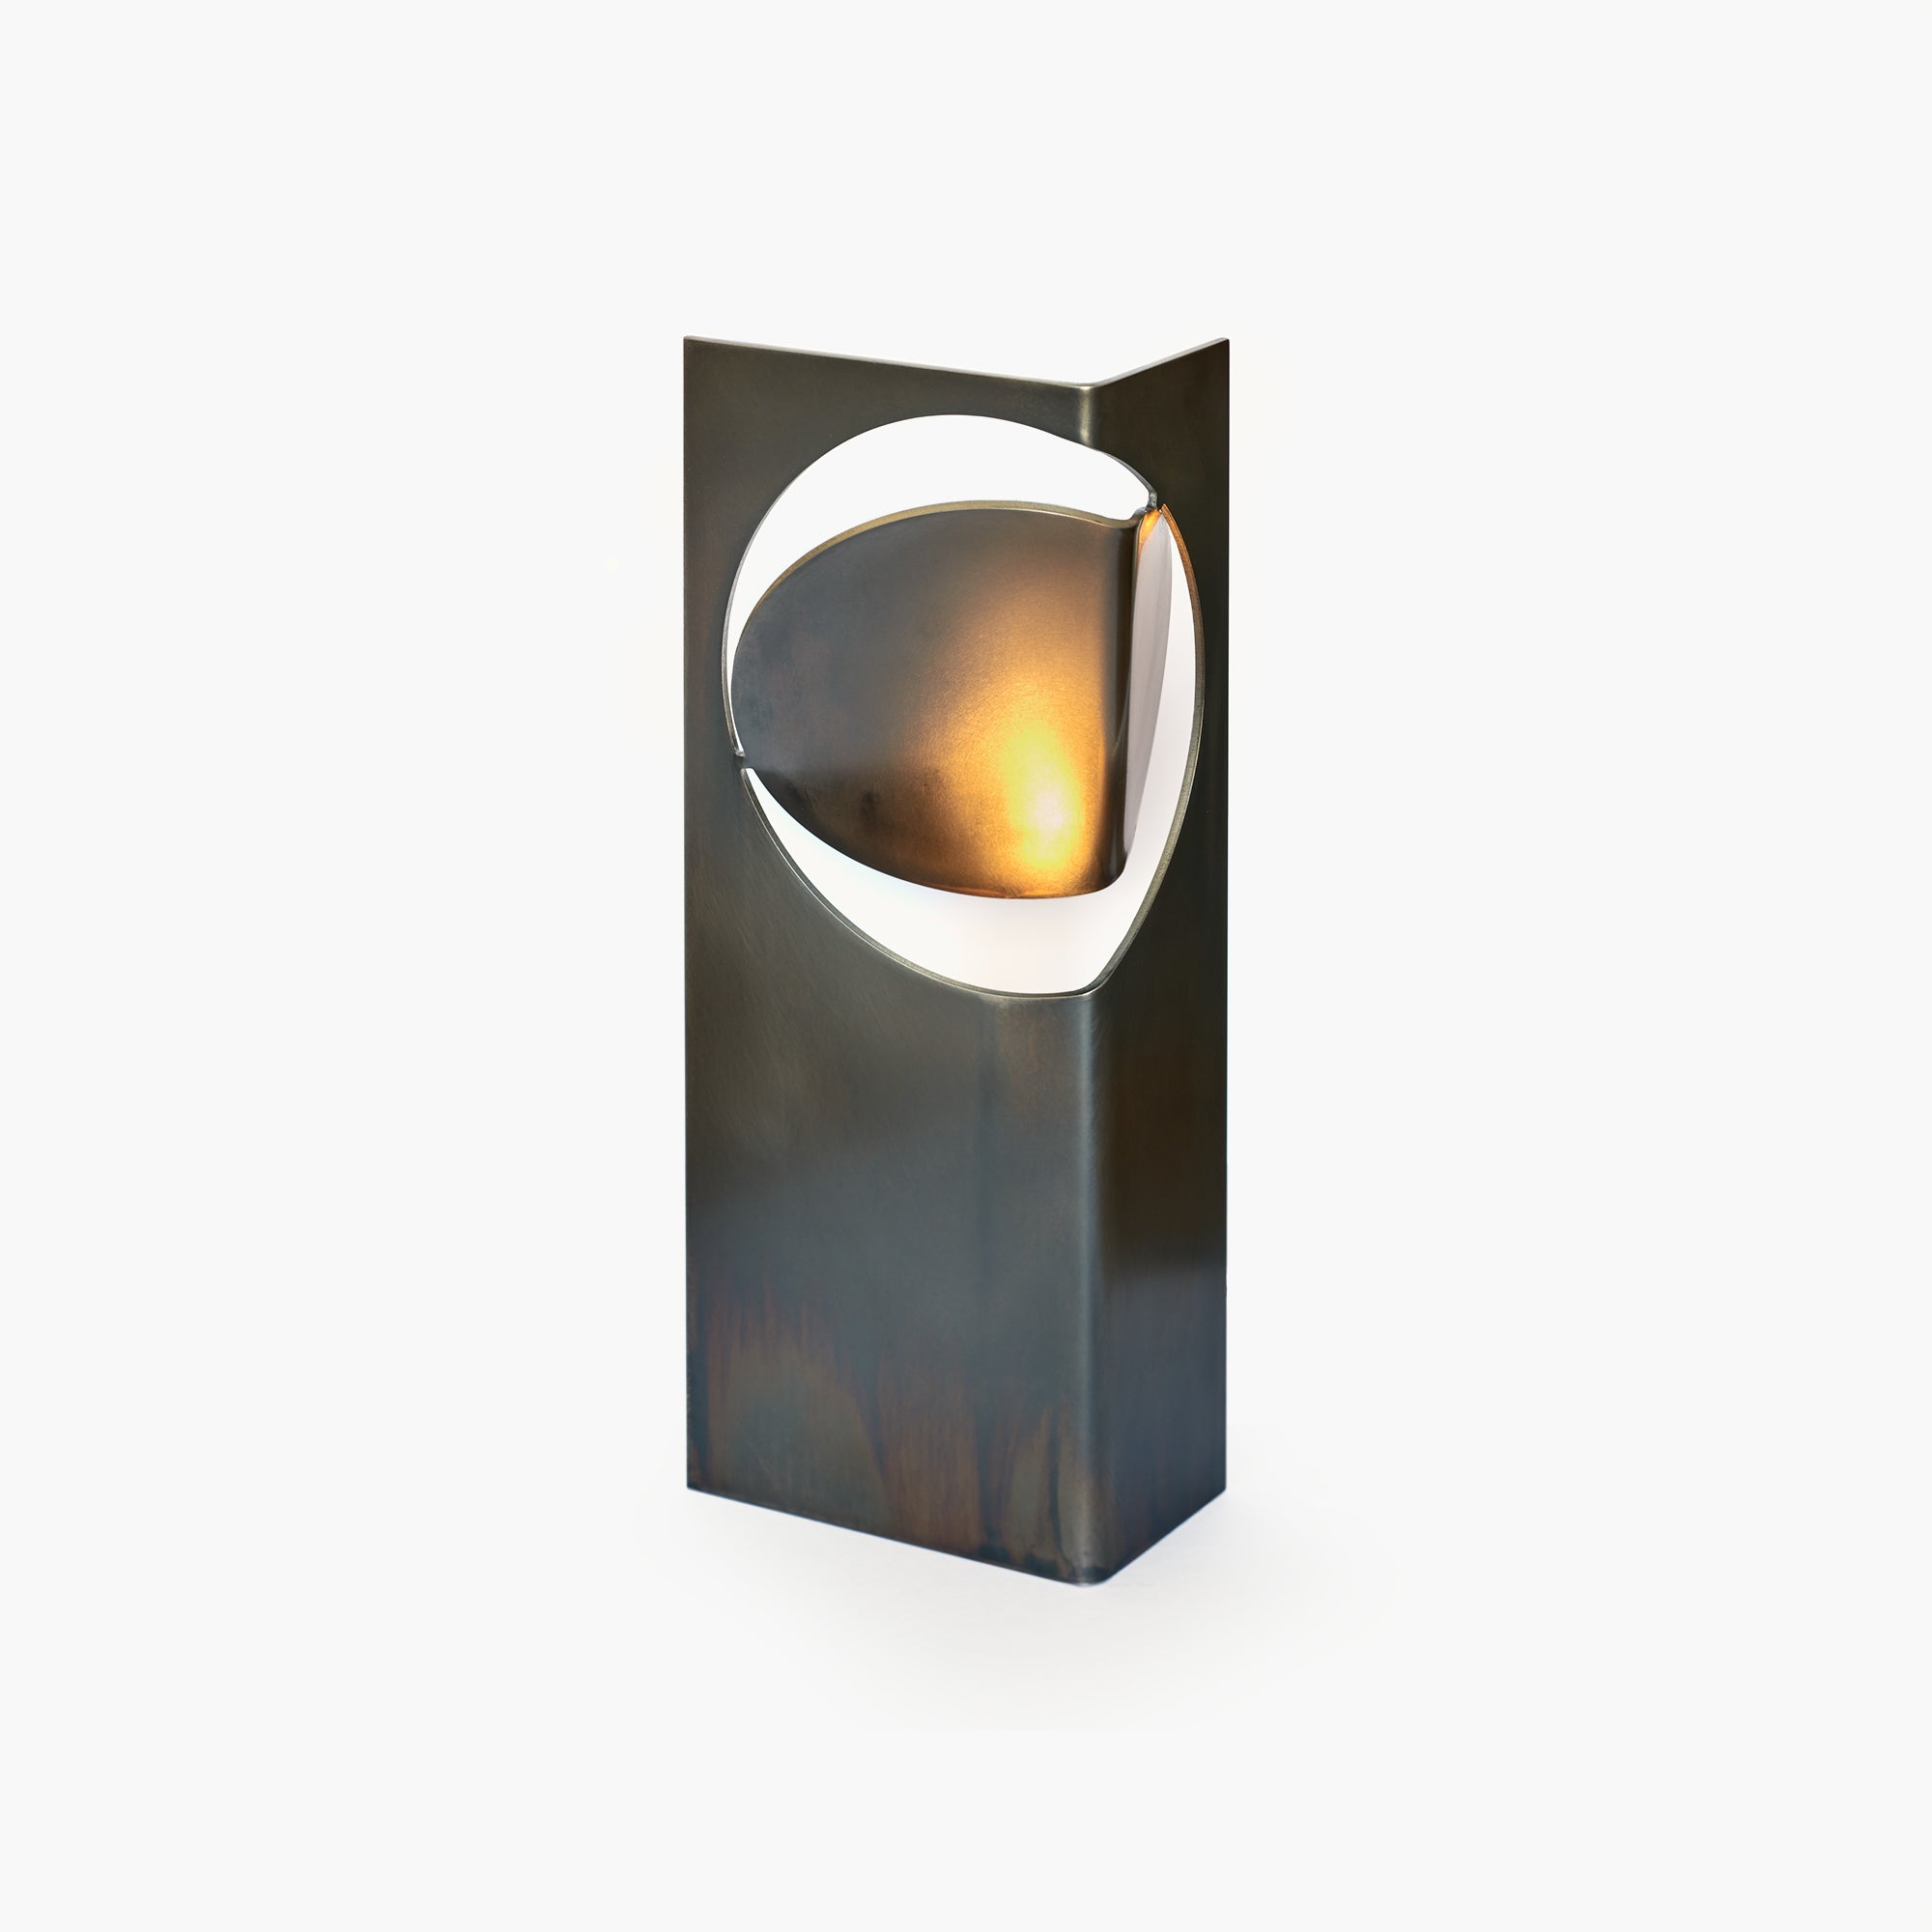 ONE ASYMMETRIC Table Light Stainless with Rich Black Patina by Frank Penders